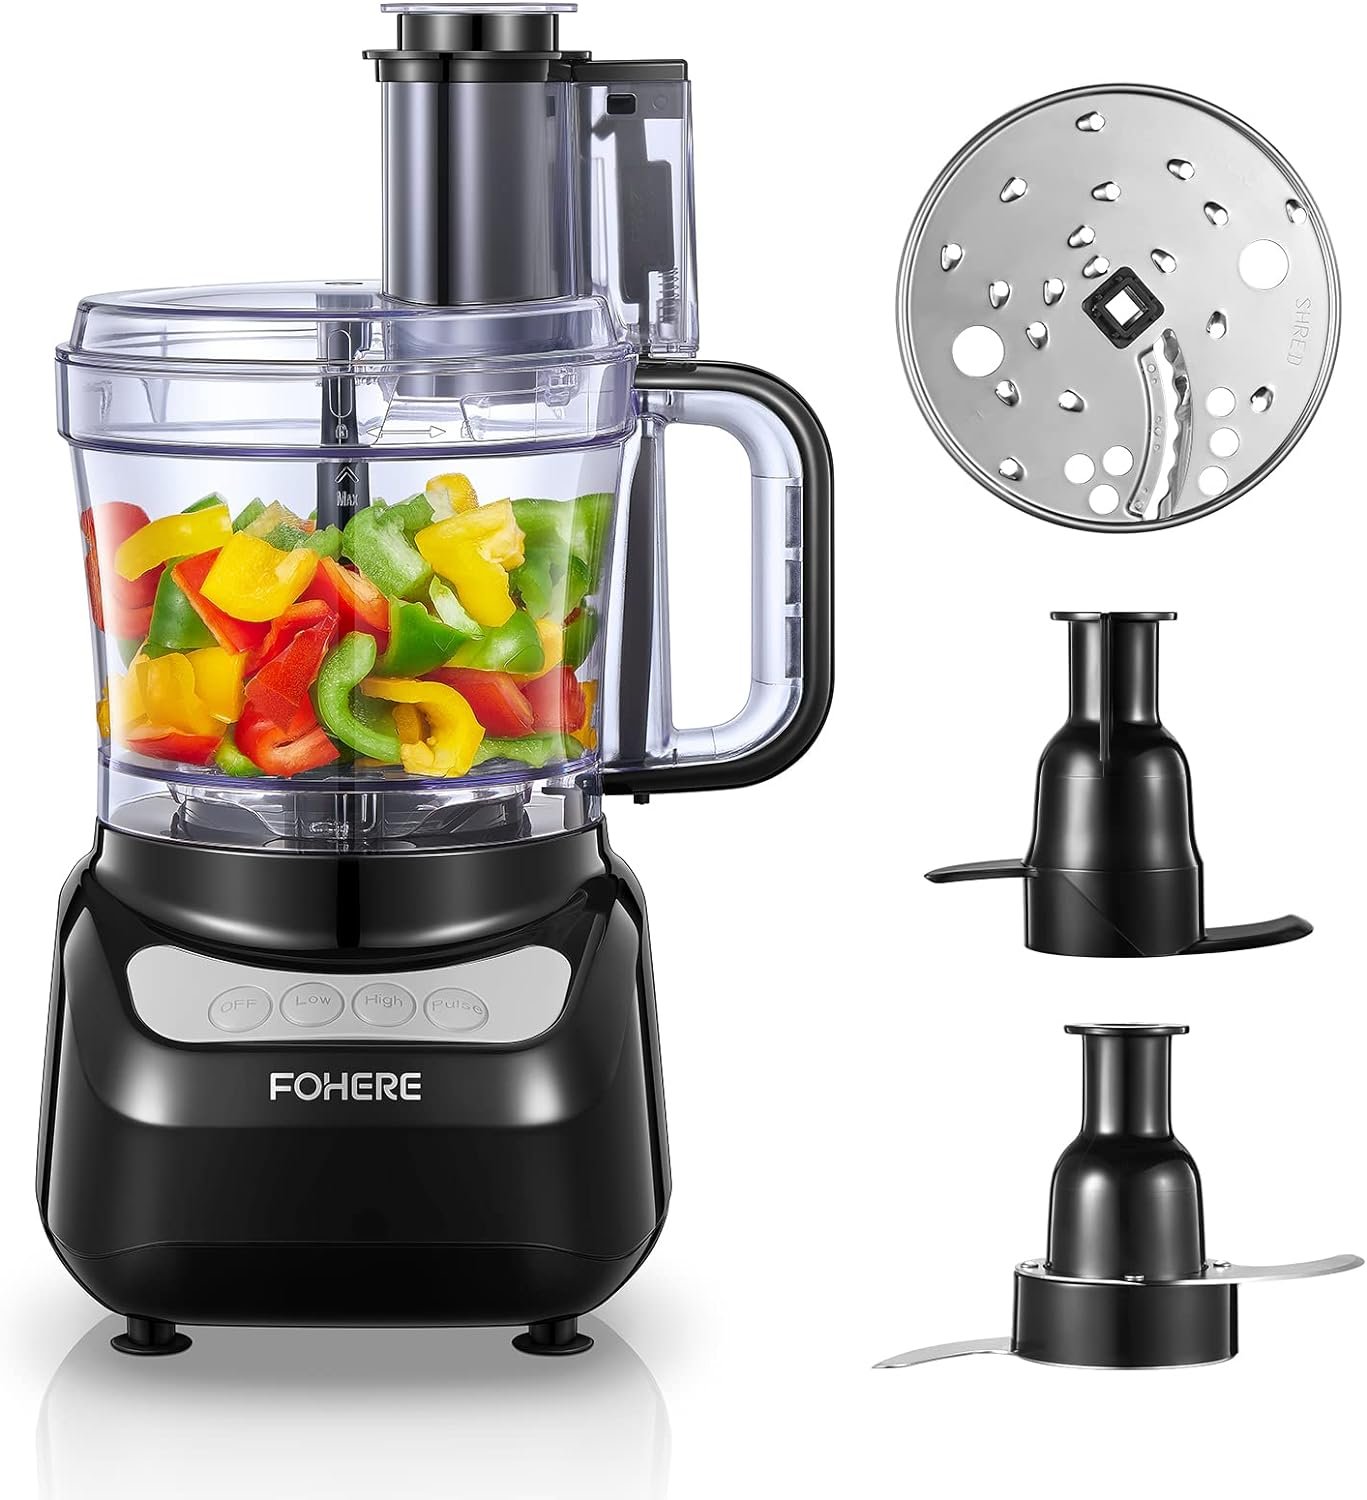 FOHERE Food Processor, 12 Cup, 2-in-1 Feed Chute Vegetable Chopper  Meat Grinder for Mincing, Dicing, Shredding, Puree  Kneading Dough, Stainless Steel